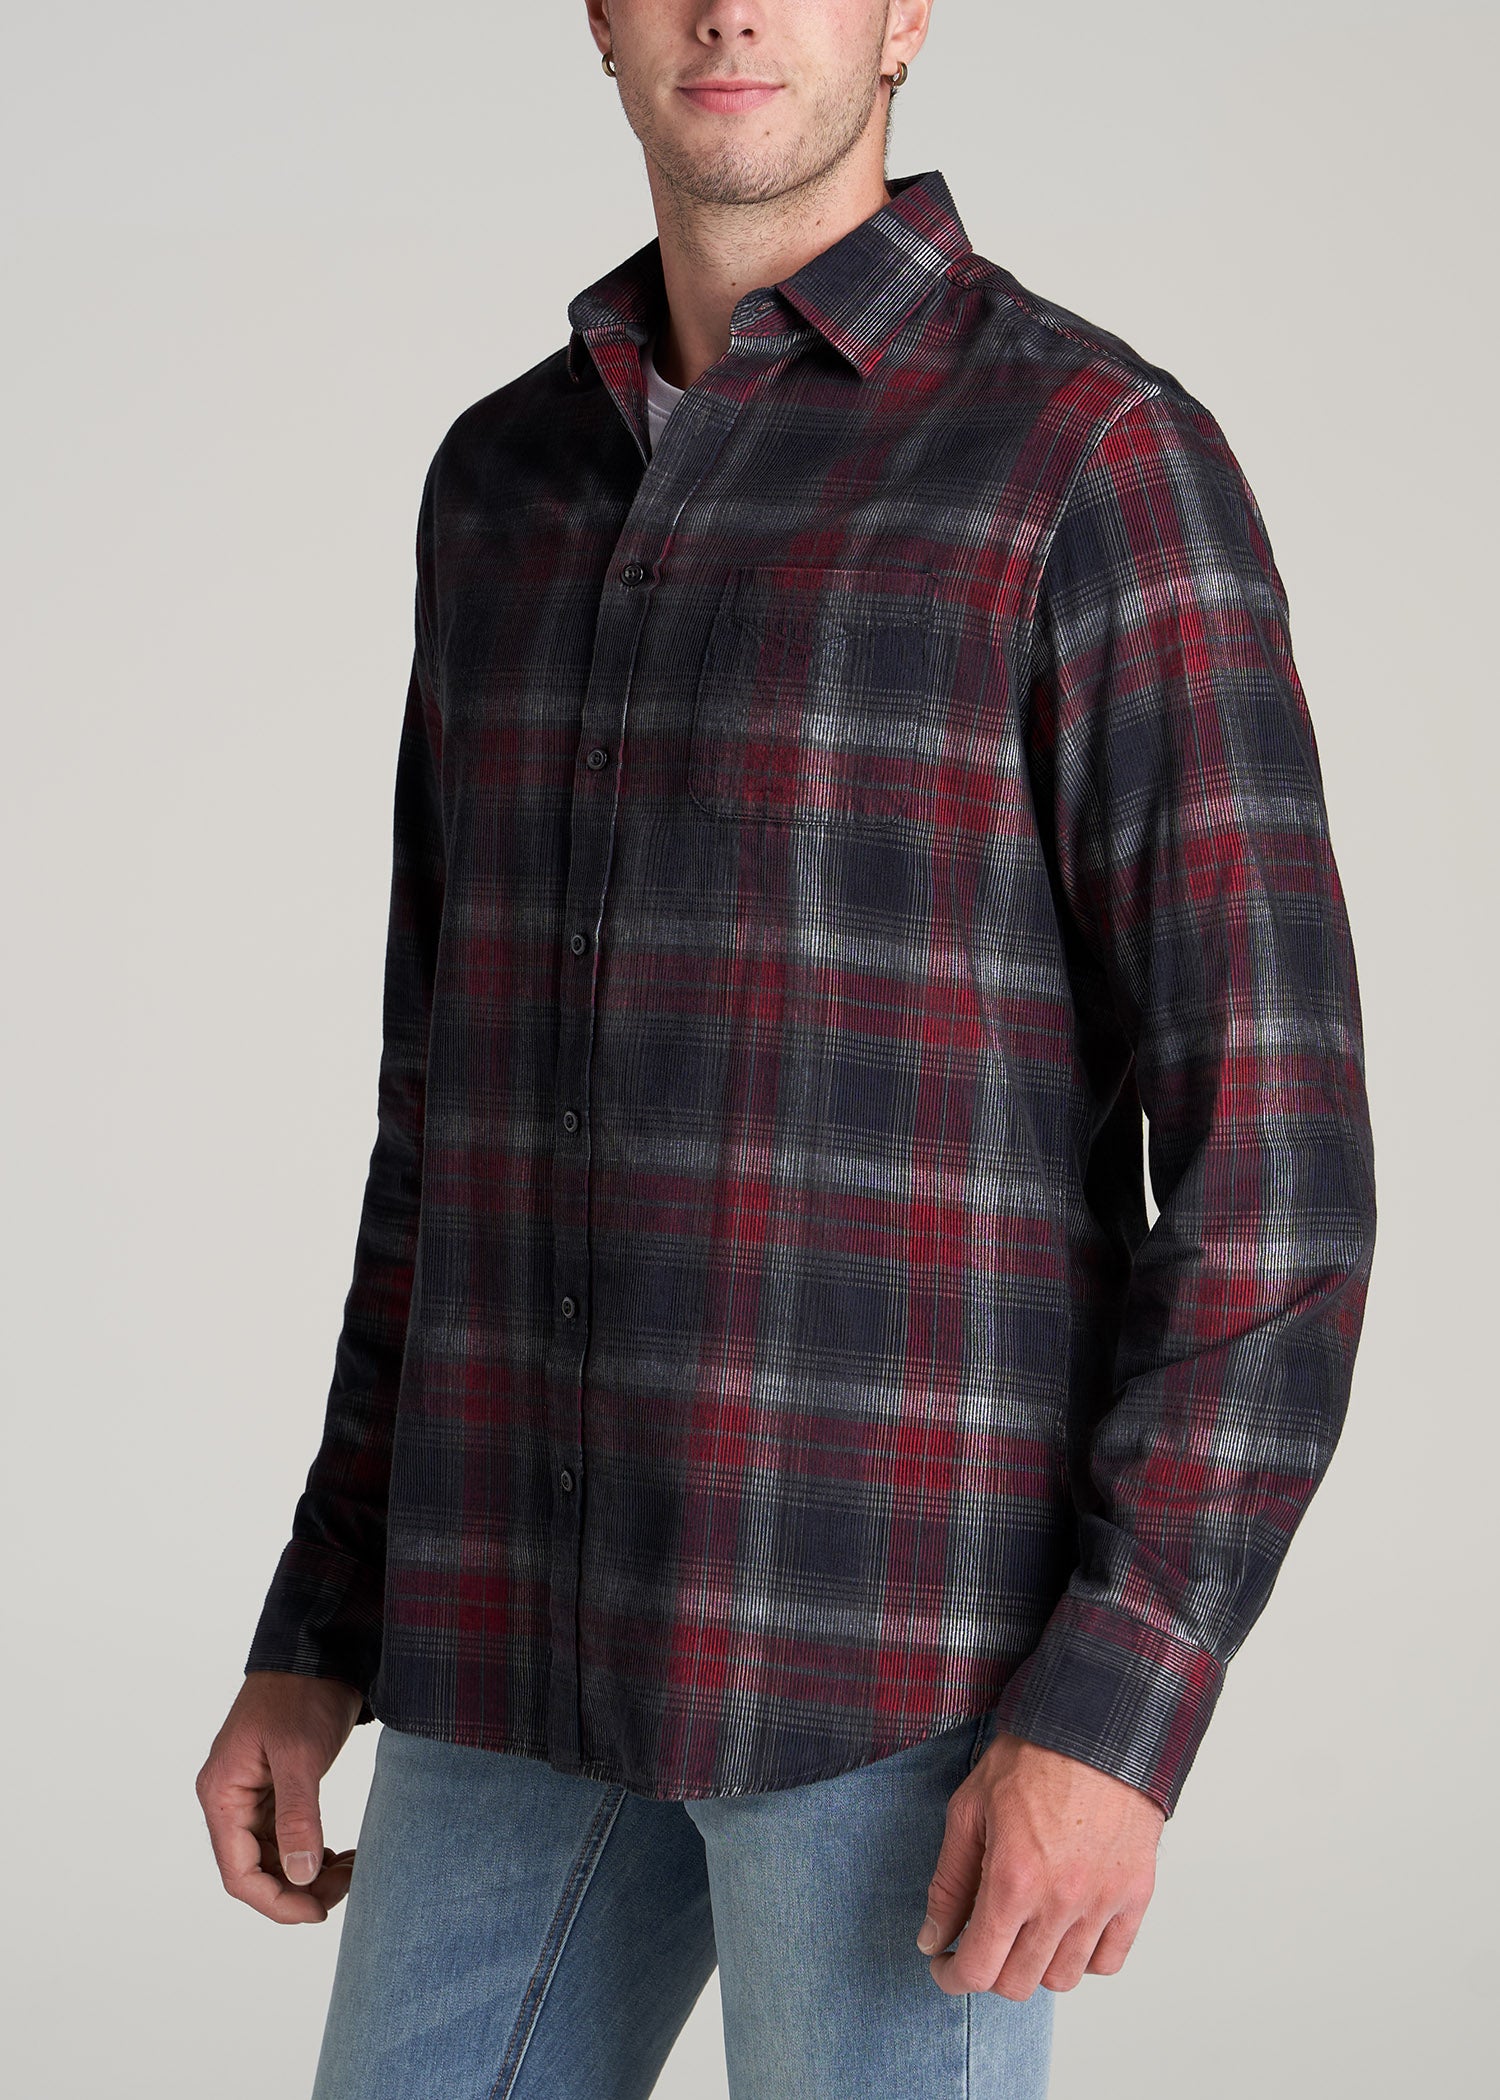    American-Tall-Men-Baby-Wale-Corduroy-Button-Shirt-Charcoal-Red-Plaid-side